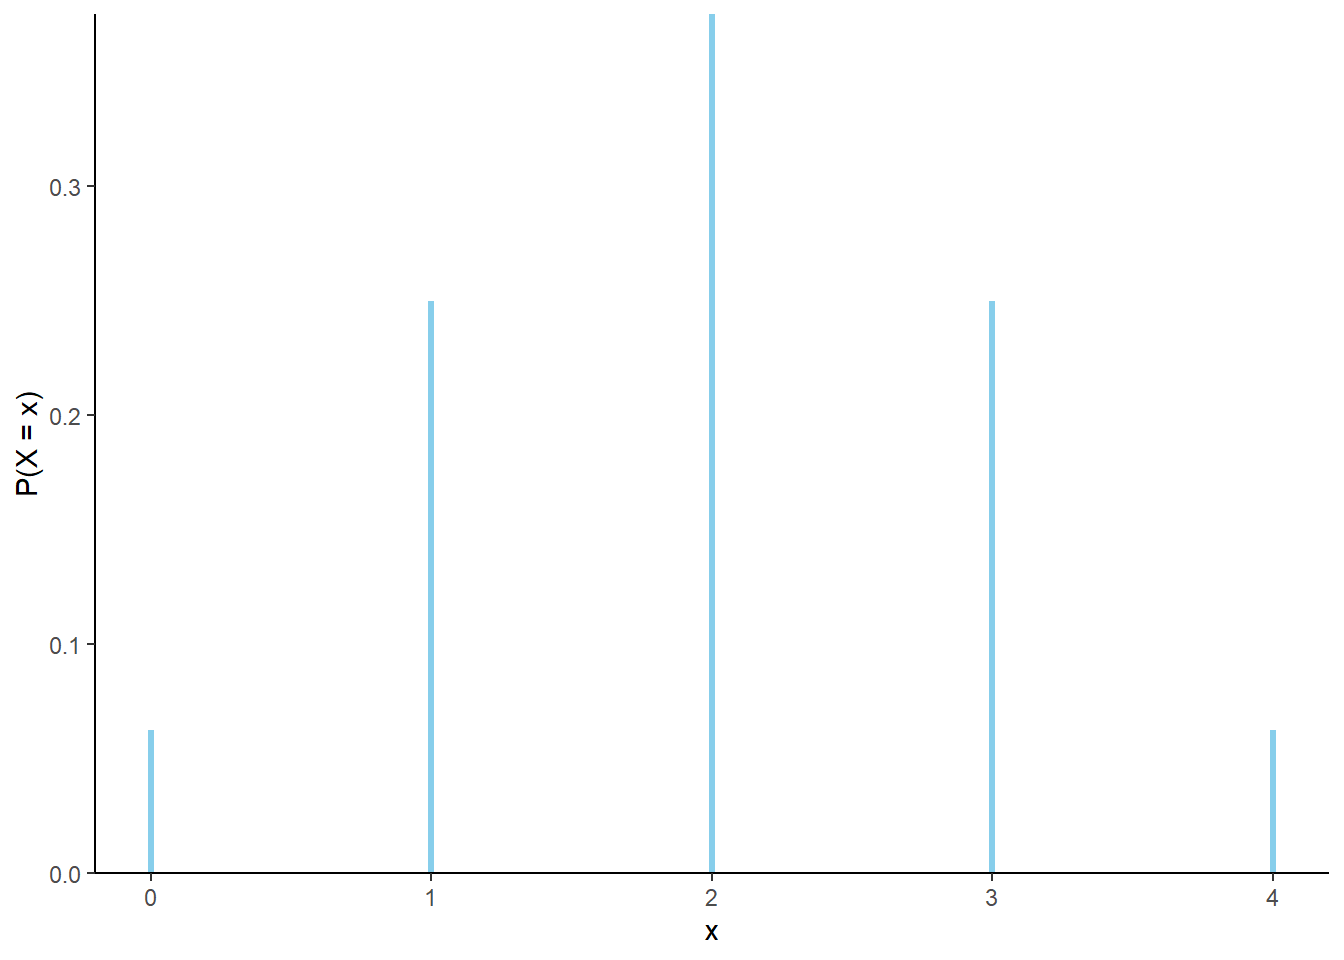 The marginal distribution of \(X\), the number of H in 4 flips of a fair coin.